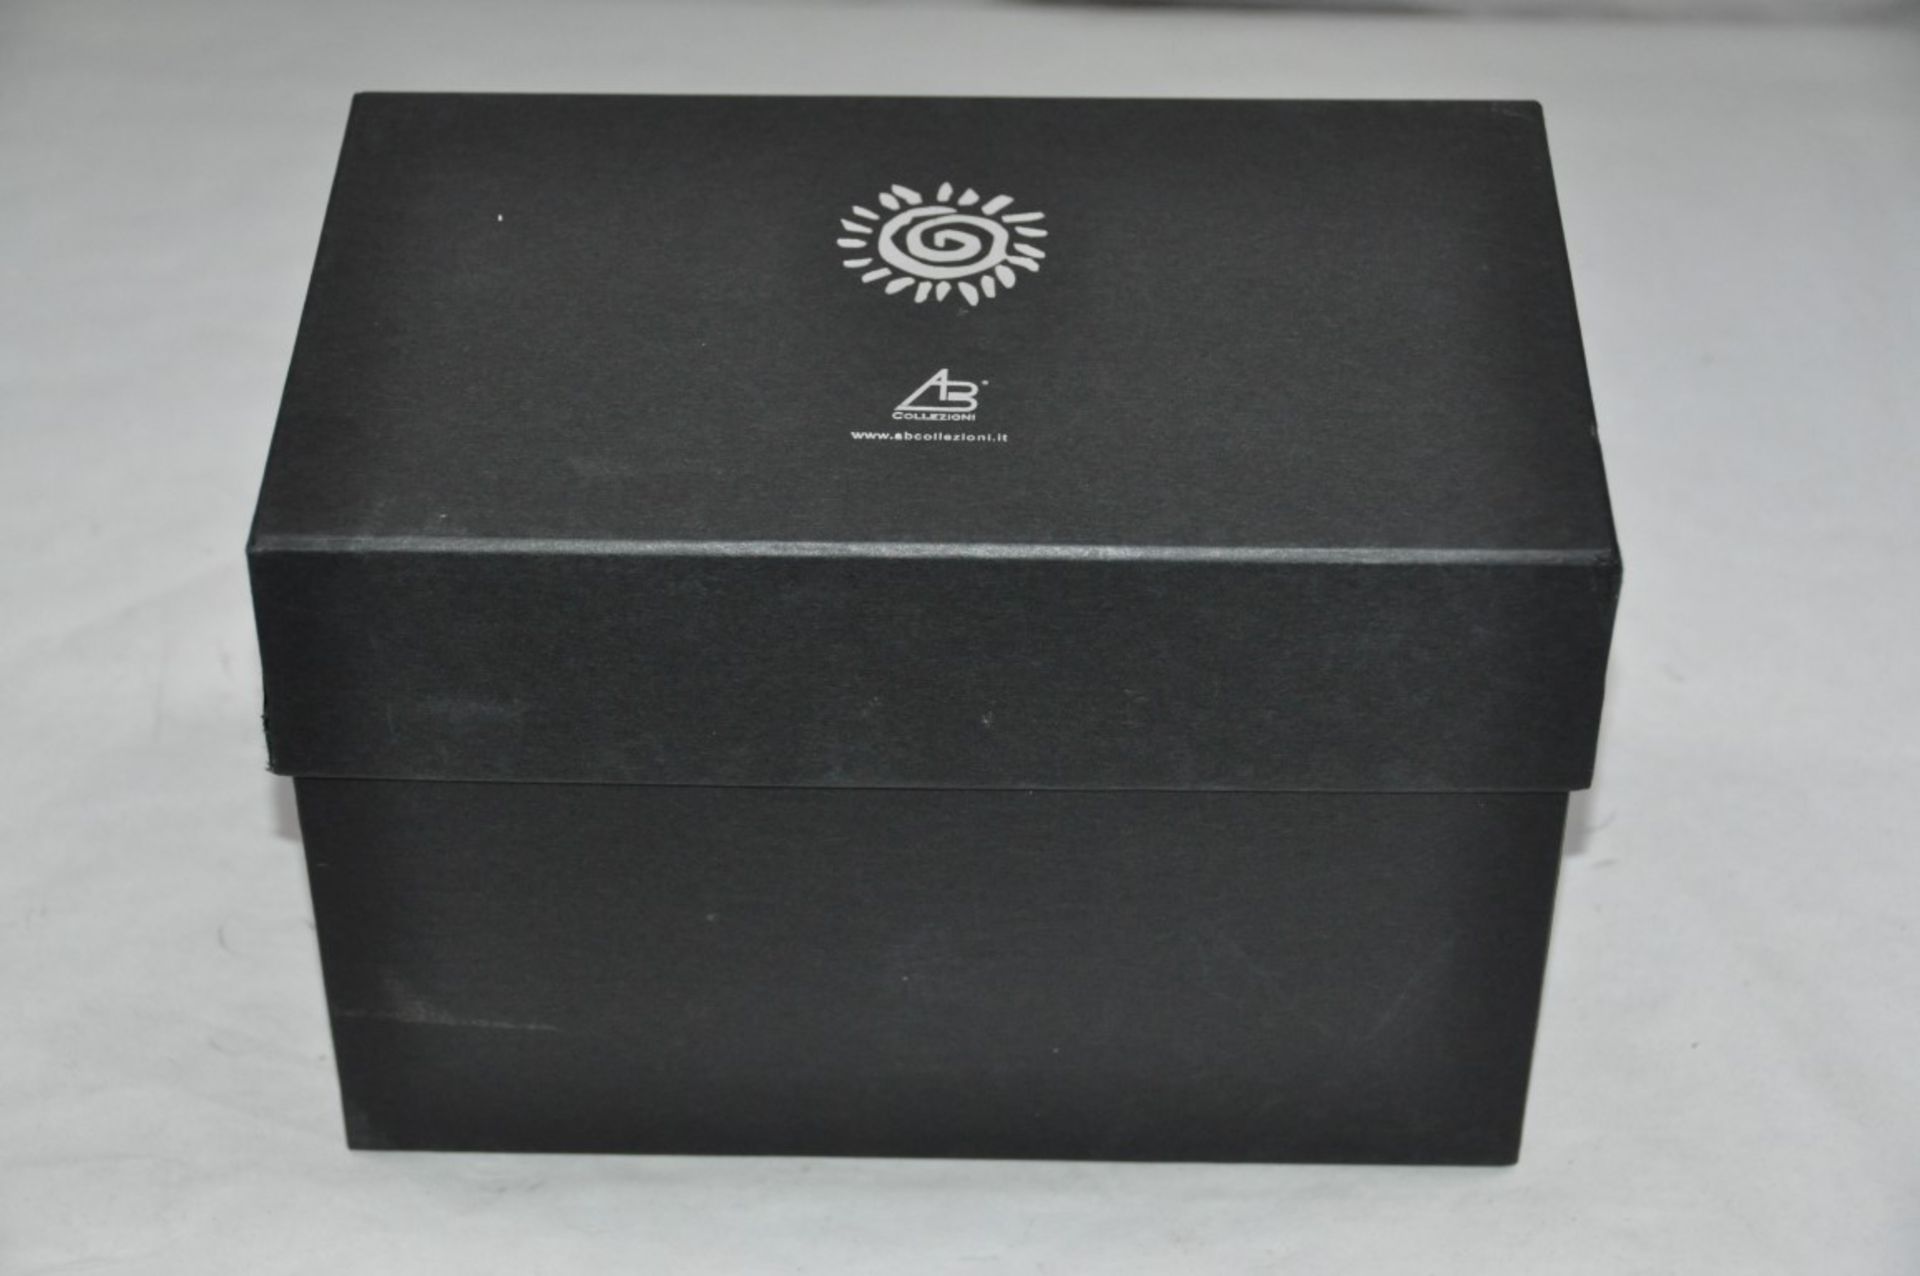 1 x "AB Collezioni" Italian Luxury Jewellery Box (31479N) - Ref LT095 – Includes 3 Pull-Out - Image 5 of 5